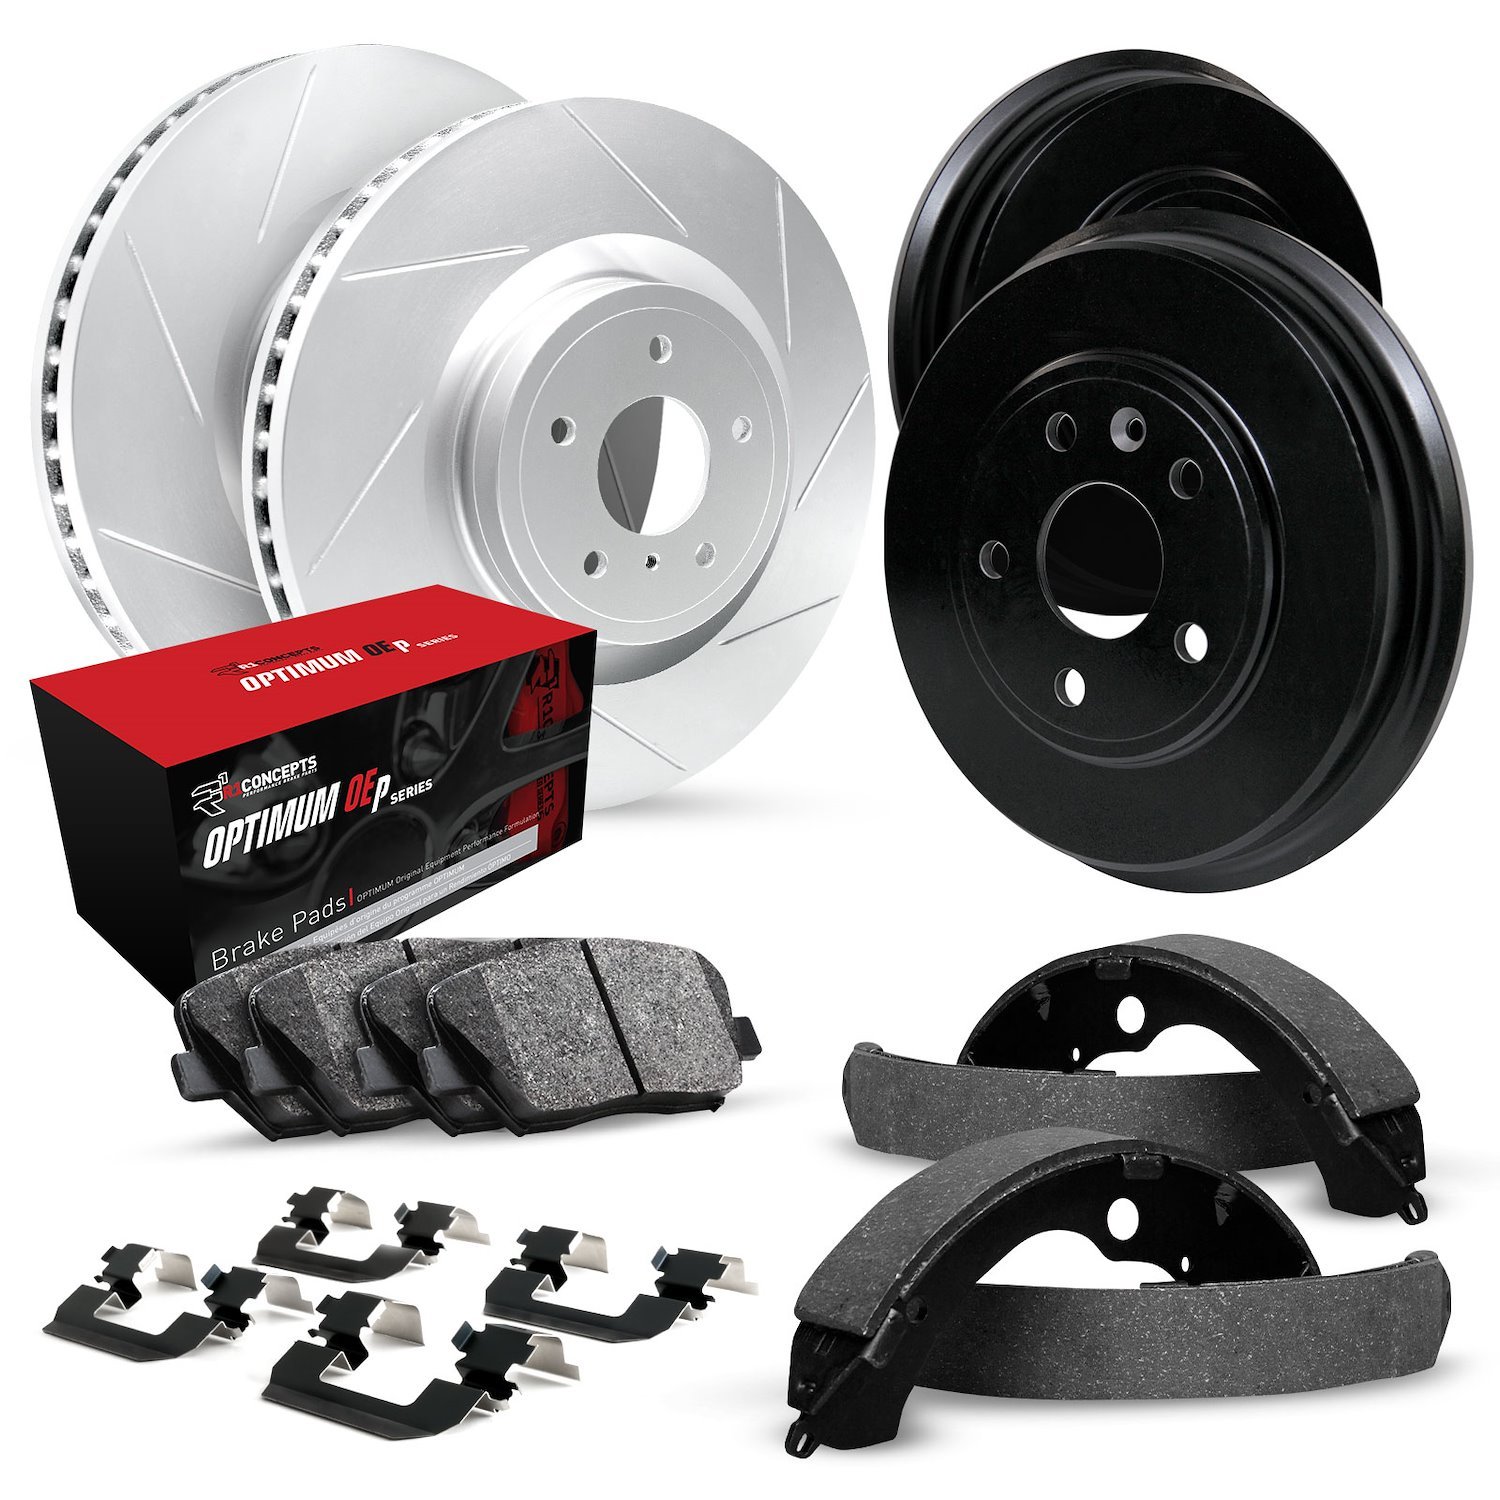 GEO-Carbon Slotted Brake Rotor & Drum Set w/Optimum OE Pads, Shoes, & Hardware, 1986-1986 Ford/Lincoln/Mercury/Mazda